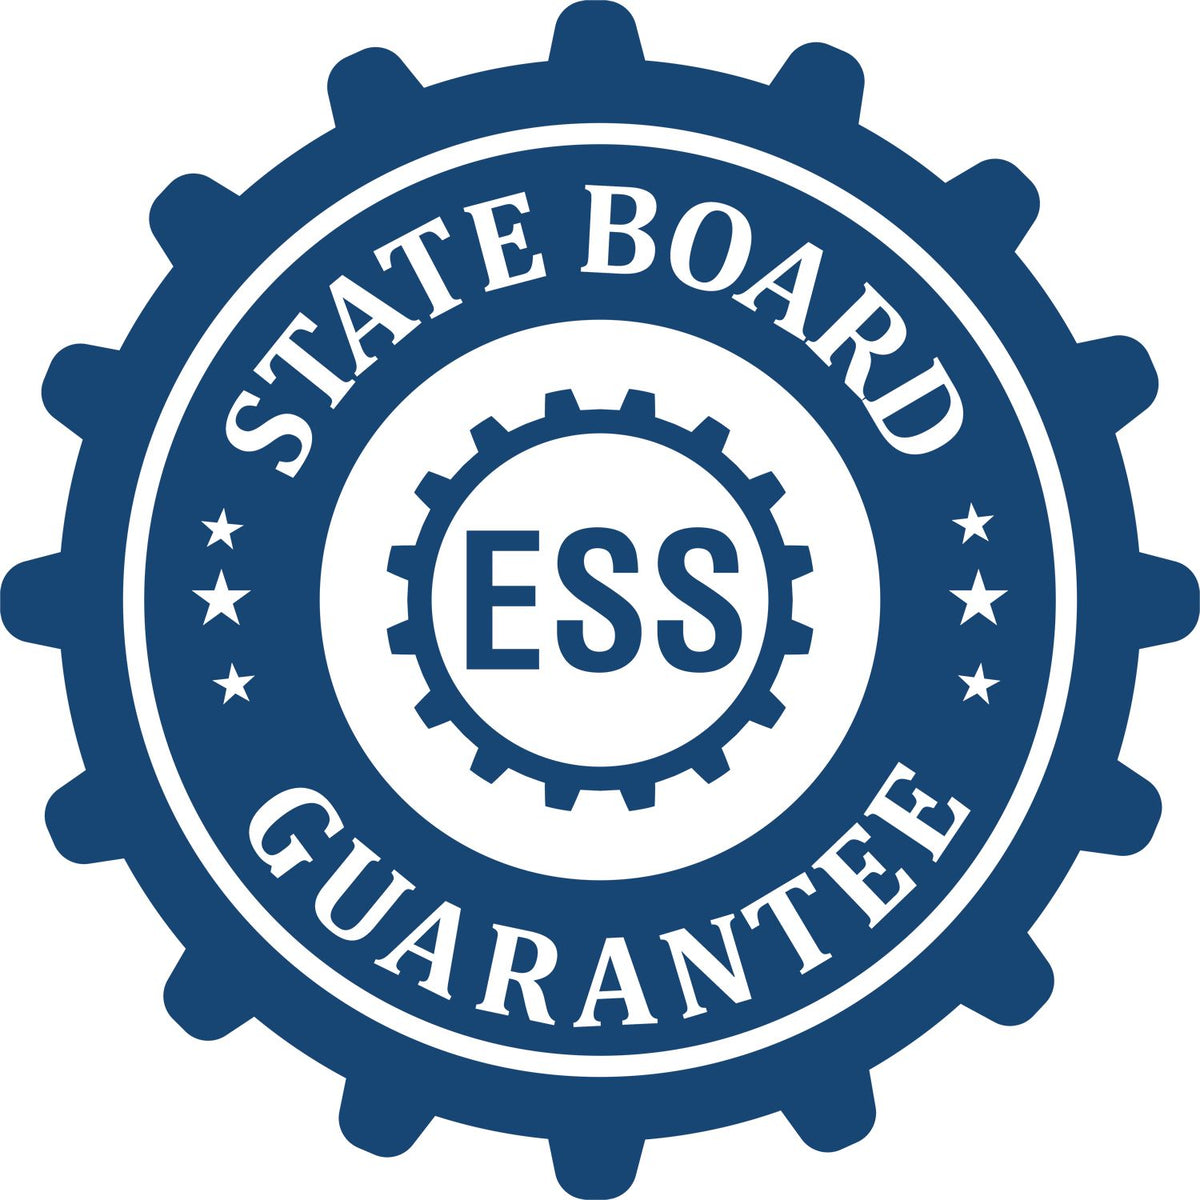 An emblem in a gear shape illustrating a state board guarantee for the Heavy Duty Cast Iron Texas Architect Embosser product.